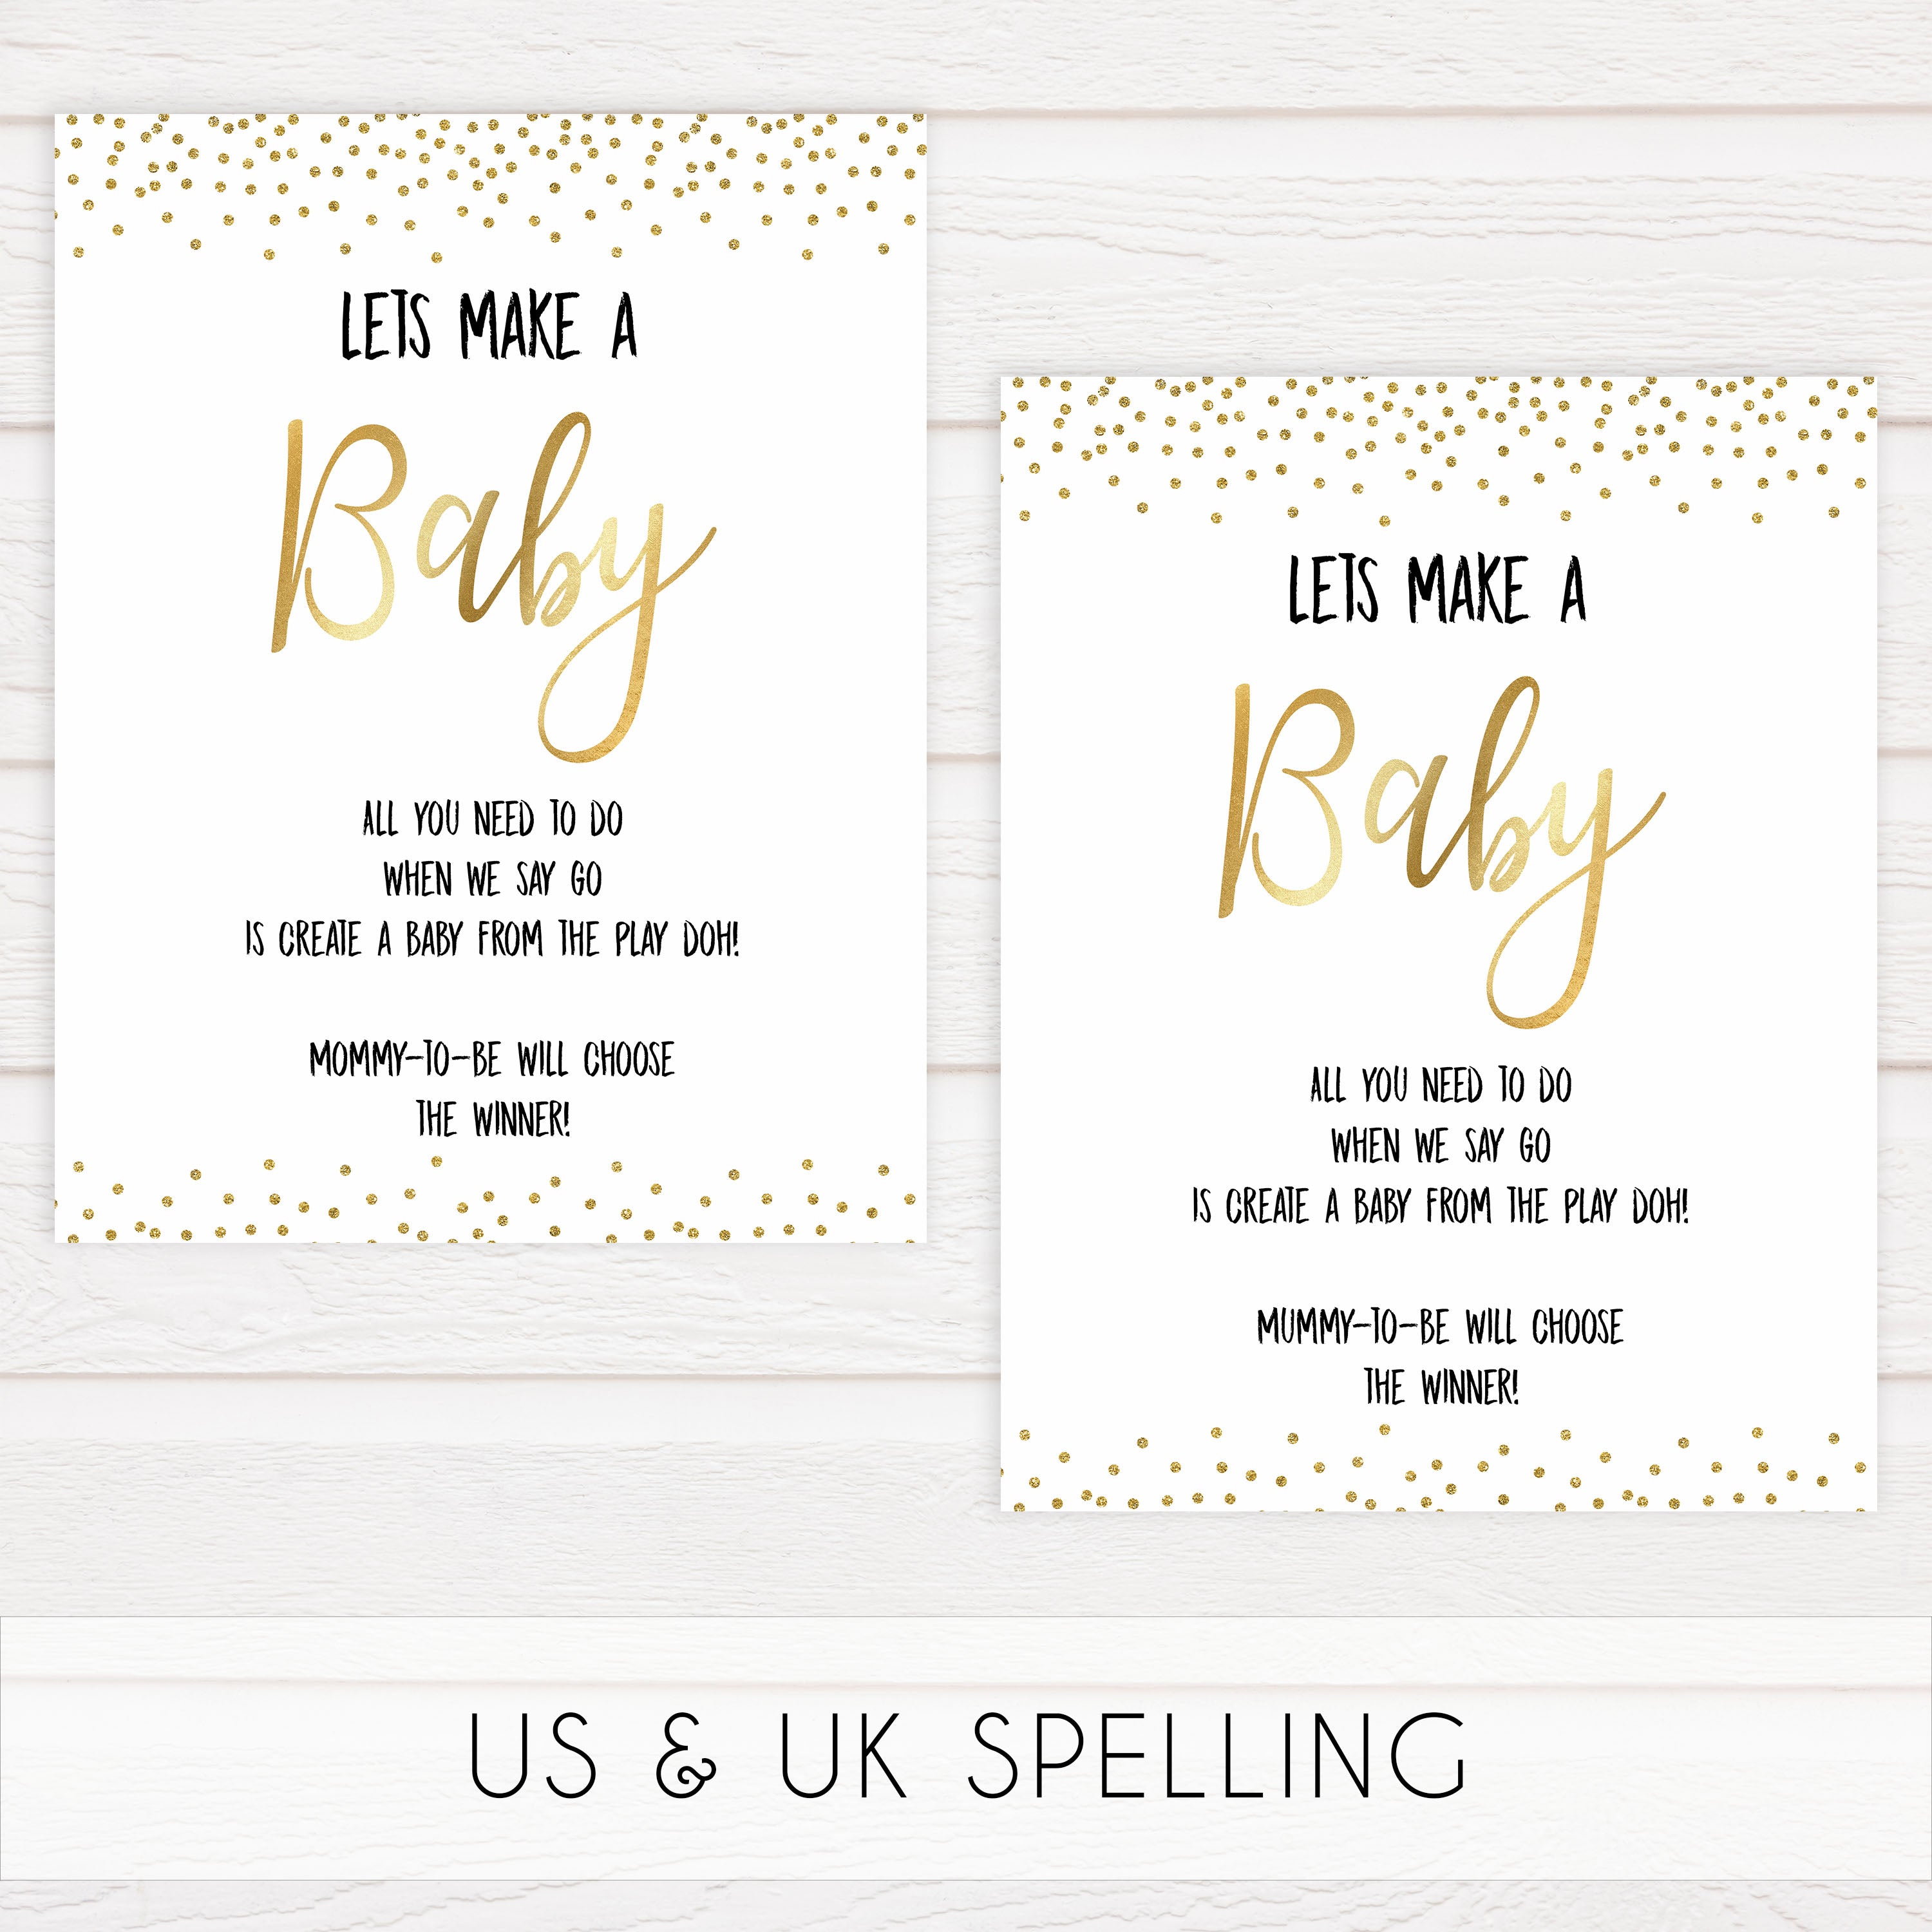 gold glitter baby games, lets make a baby game, printable baby games, make a baby game, fun baby games, top 10 baby games,